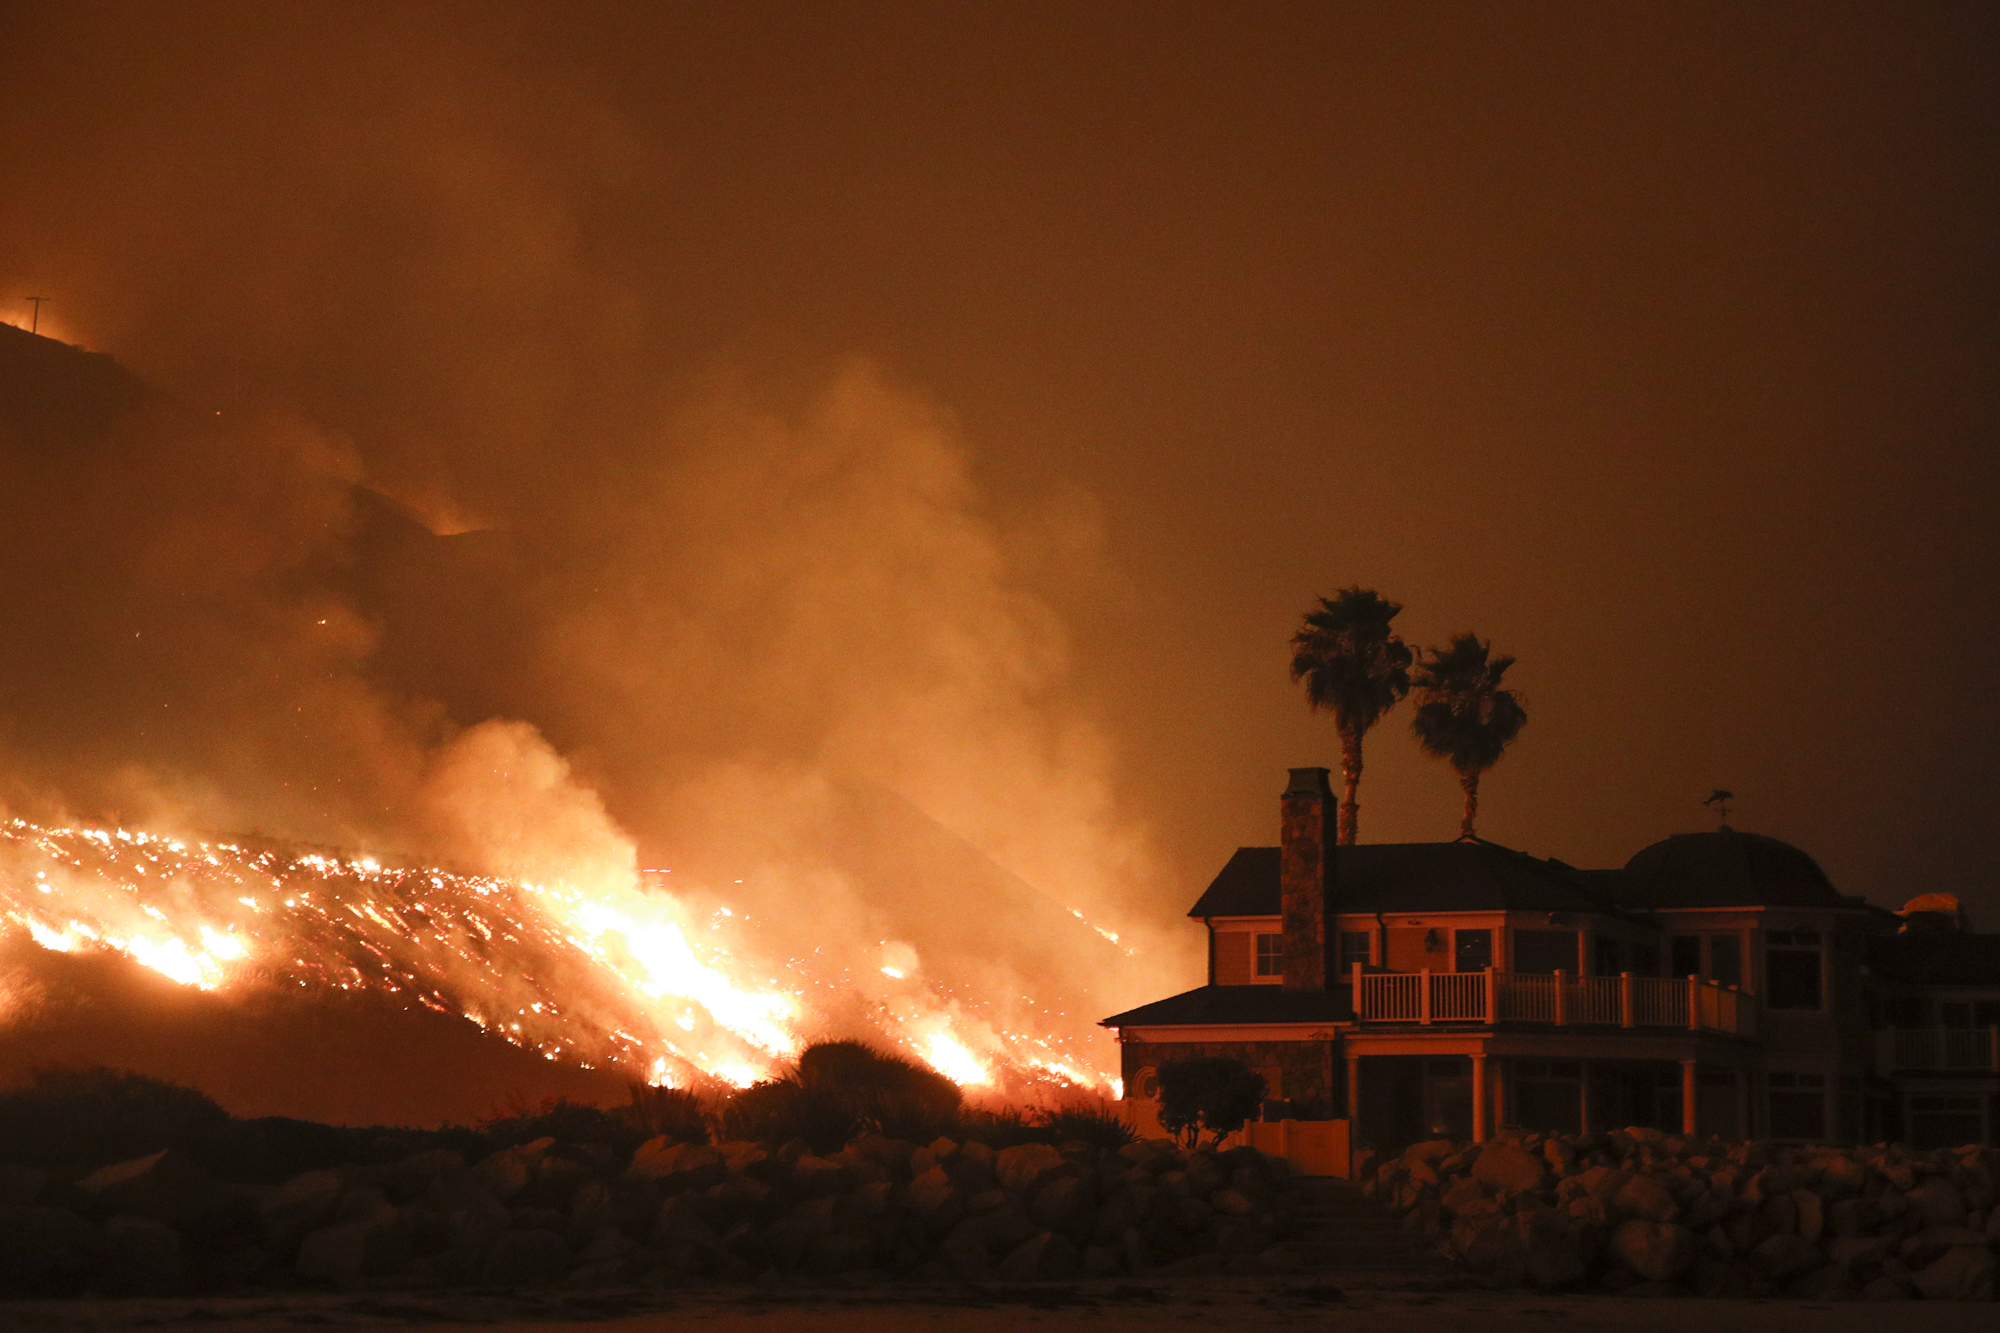 A wildfire rushes toward a mansion in Southern California with two palm trees seen in the home's backyard. The sky is black and the fire glows an ominous, bright orange and red.